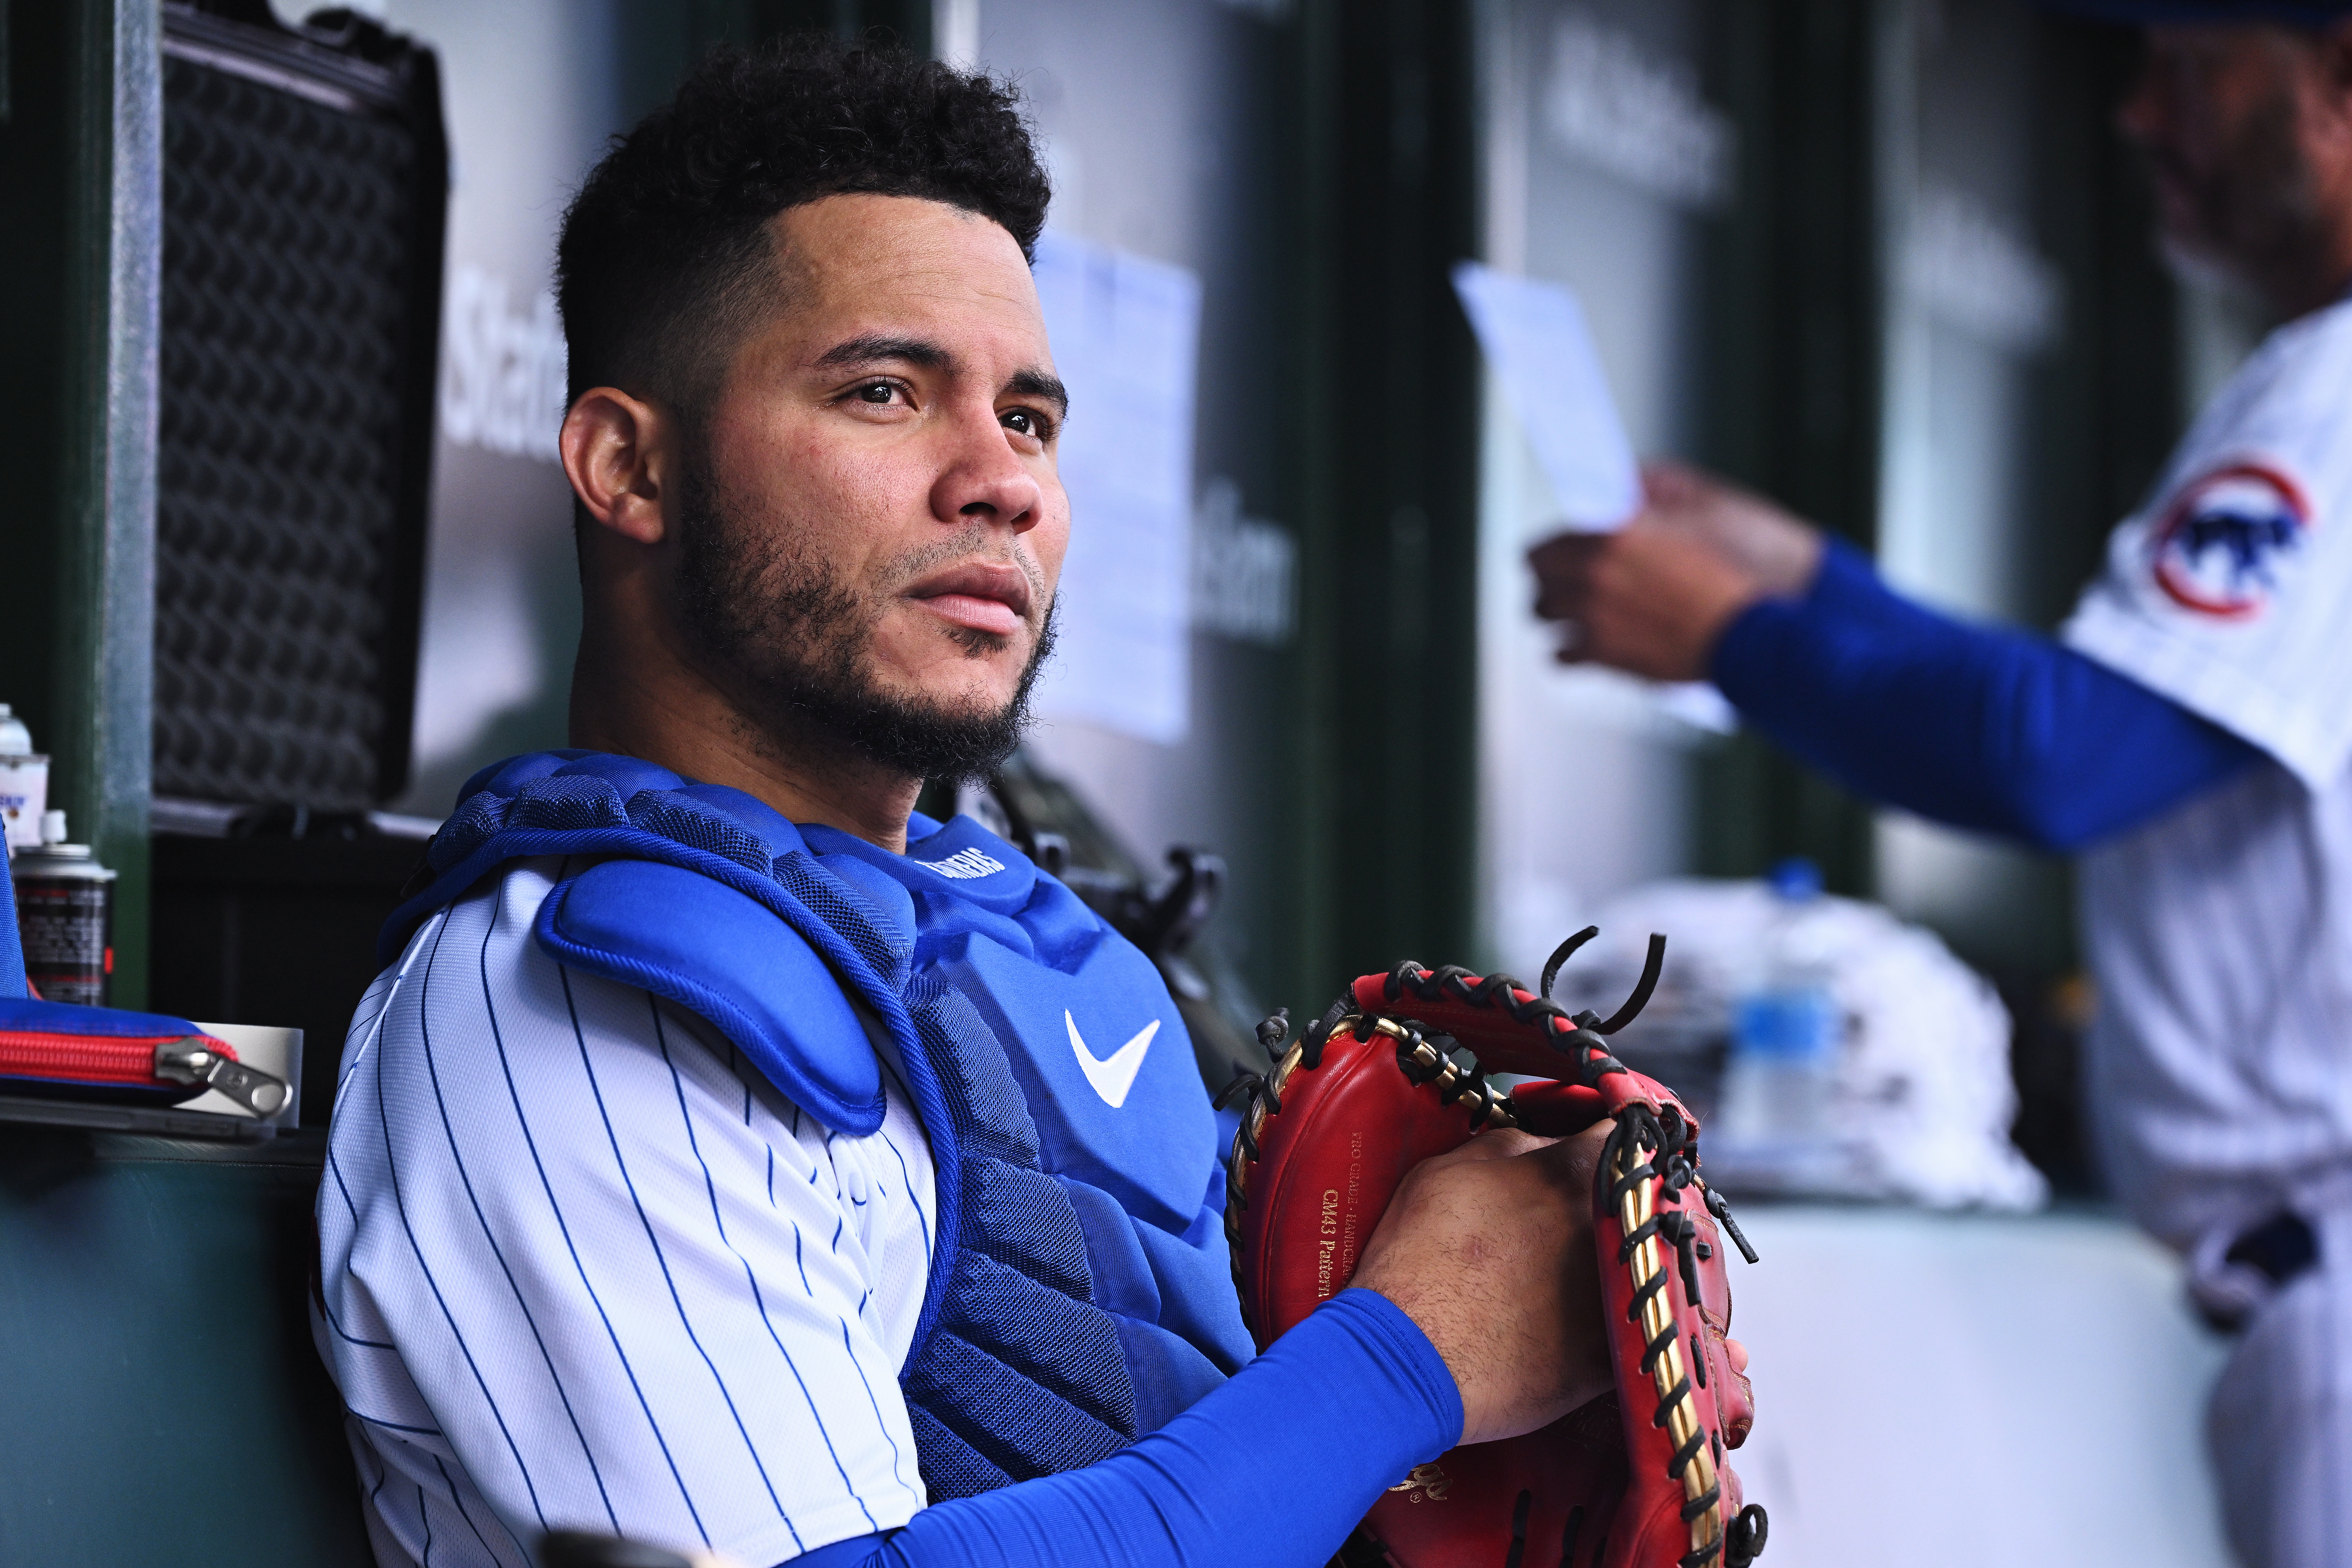 How Christopher Morel is processing a potential trade of his 'brother' Willson  Contreras - Marquee Sports Network